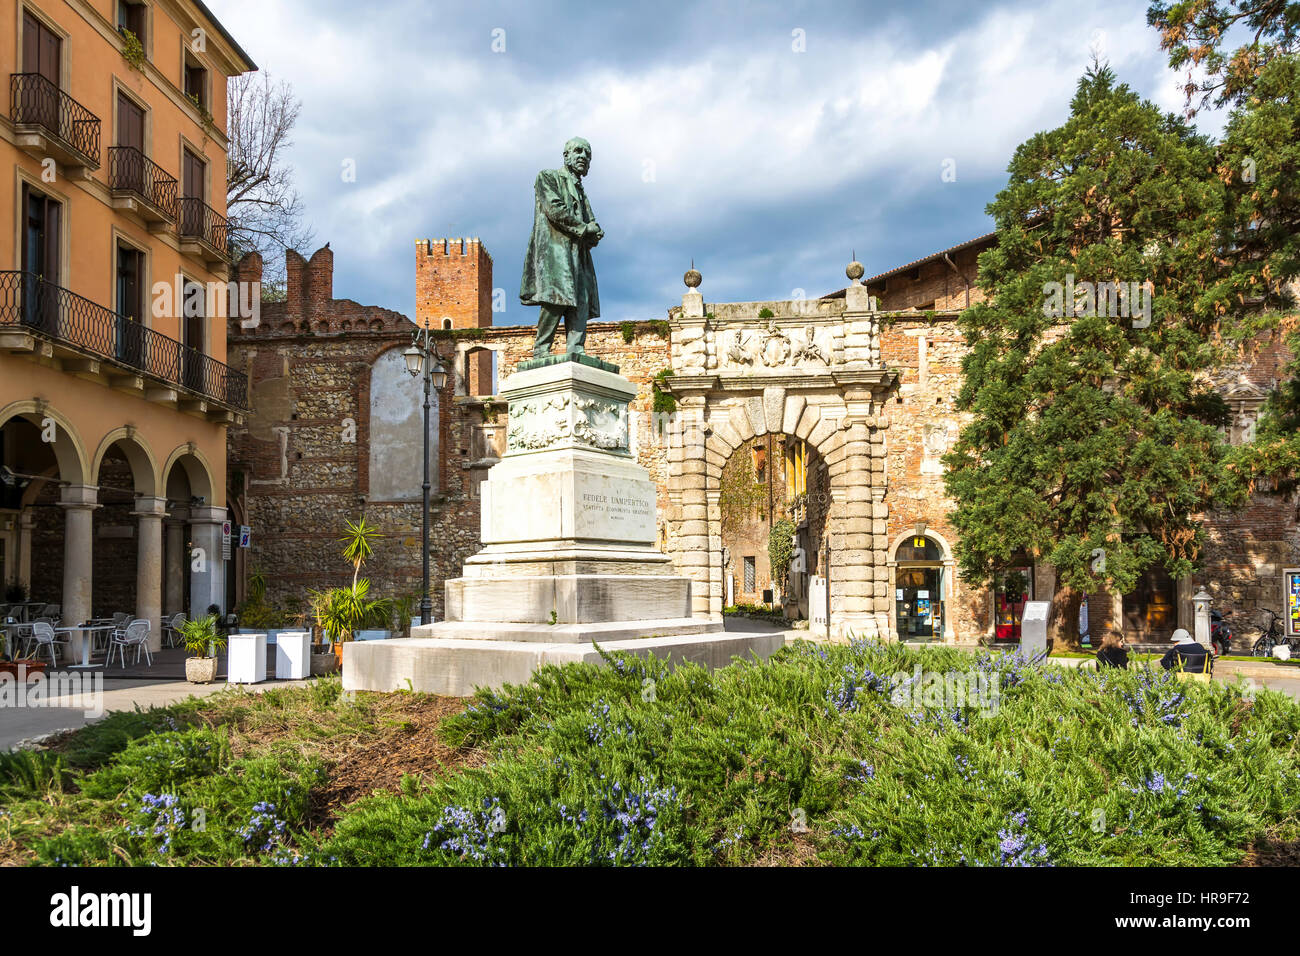 Vicenza, Italy -April 3, 2015: The entrance to the Olympic theater in Vicenza,Italy during a cloudy day. Stock Photo